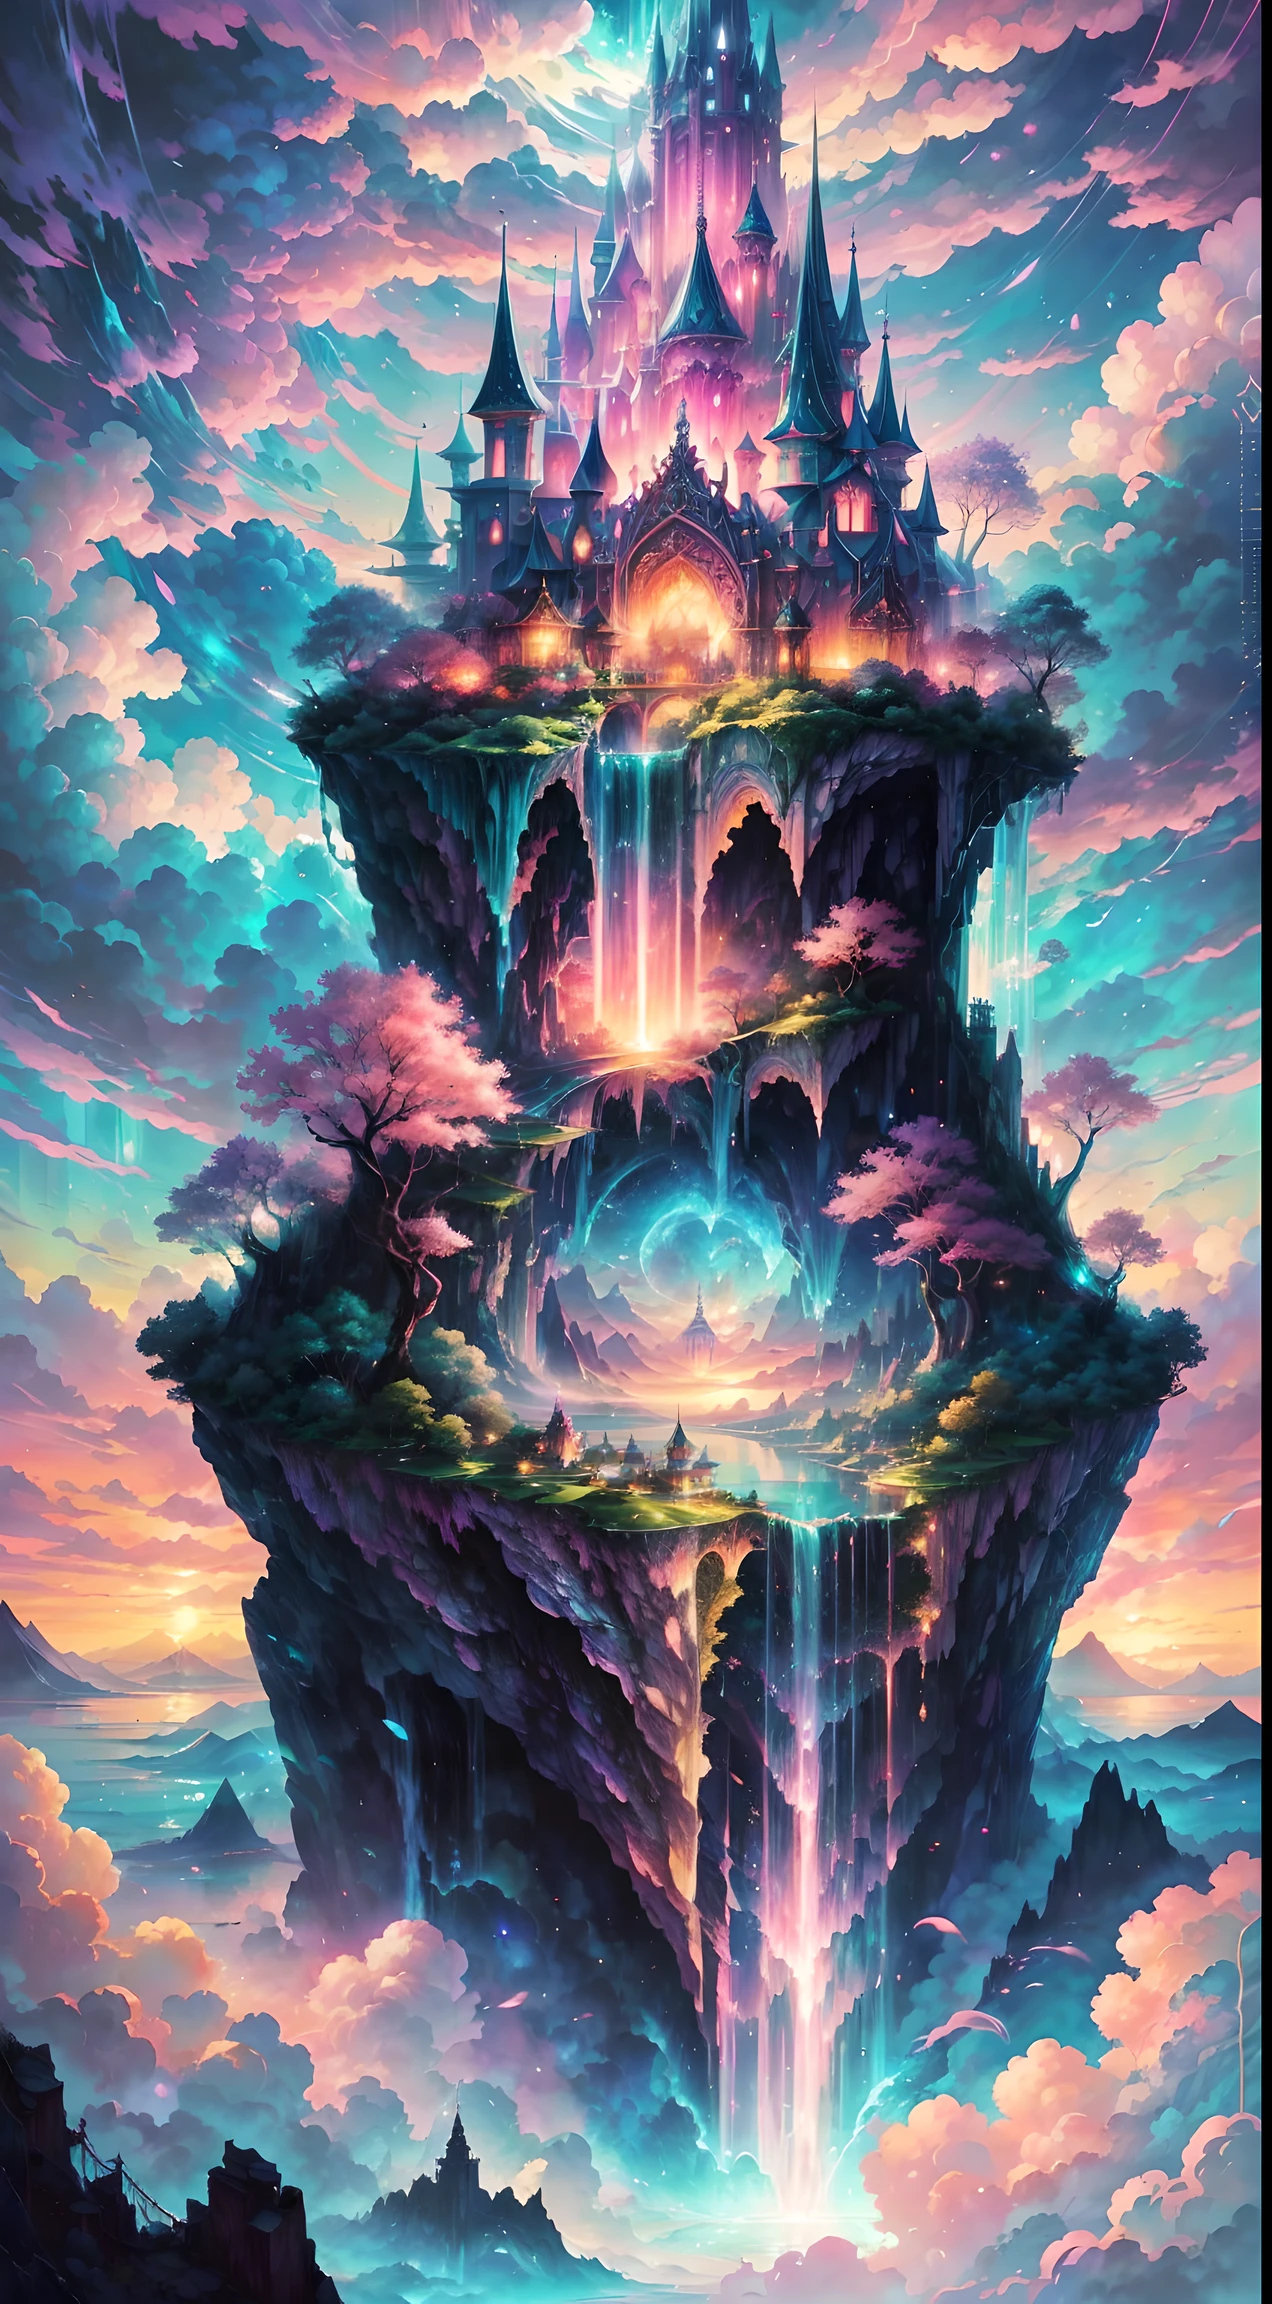 Envision a mesmerizing scene of a magnificent realm of romantic dreams. The environment is filled with intricate floating islands, fluffy clouds, waterfalls cascading from the floating islands, and a vibrant, surreal atmosphere. The atmosphere is filled with a sense of wonder and tranquility. Include many shades of pink in the image along with other vibrant jewel-toned hues. This scene will be depicted in an anime-style illustration, with soft lines, pastel colors, and a whimsical touch. All buildings are extremely detailed and elegant. The artwork will capture the ethereal beauty and tranquility of the dreamlike realm, creating a sense of harmony and escape from the ordinary world. Include teal water, colorful watercolor skies, glowing elements, and many small fantasy details including iridescence, expertly created majestic landscapes, and shimmer and glimmer. Above all else, this should look like a fantasy artwork.